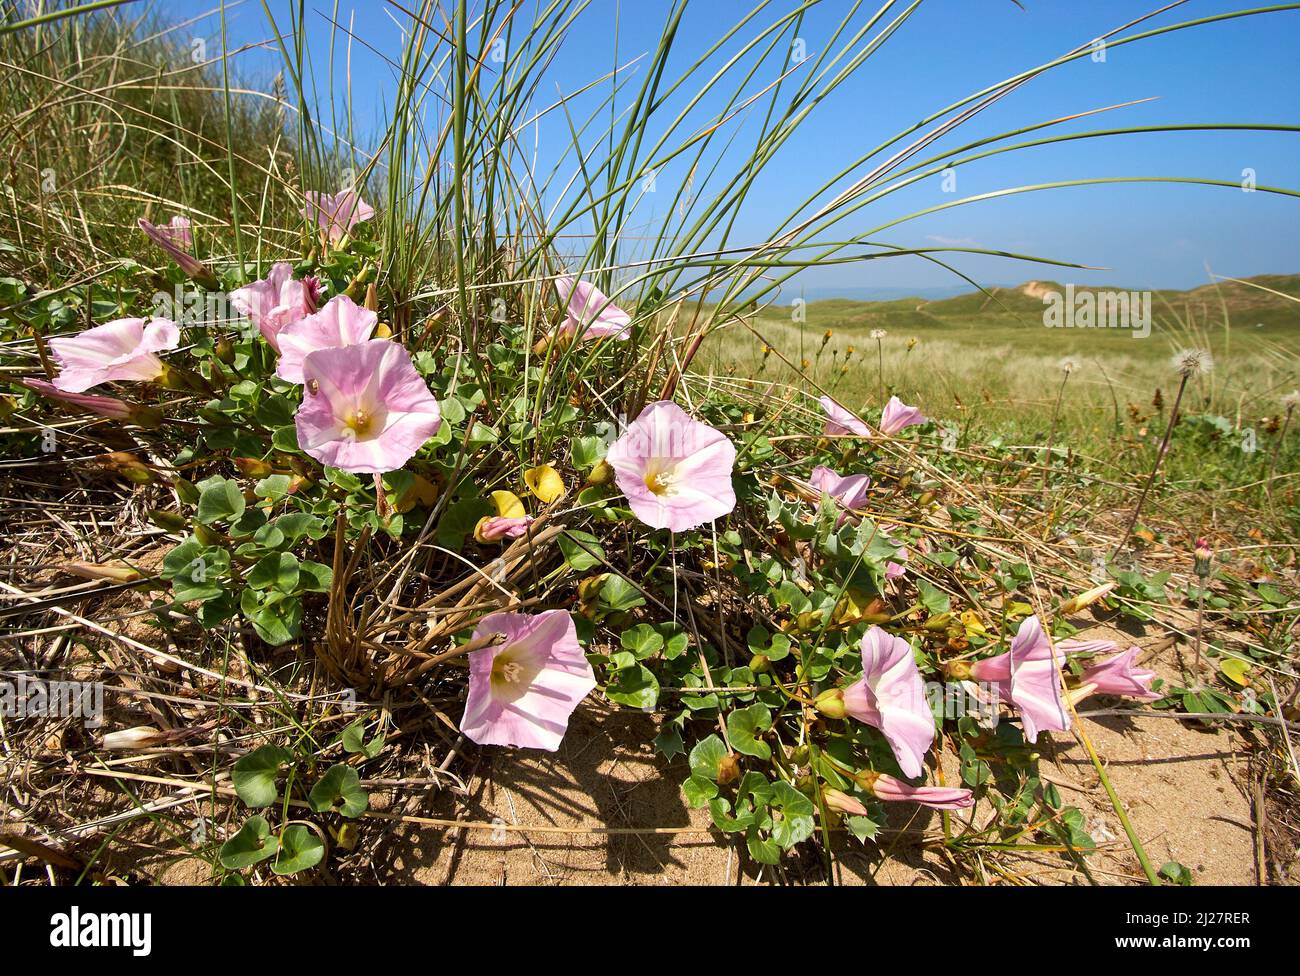 Sea Bindweed Convolvulus soldanella growing in dry sand dunes at Kenfig Burrows on the South Wales coast UK Stock Photo